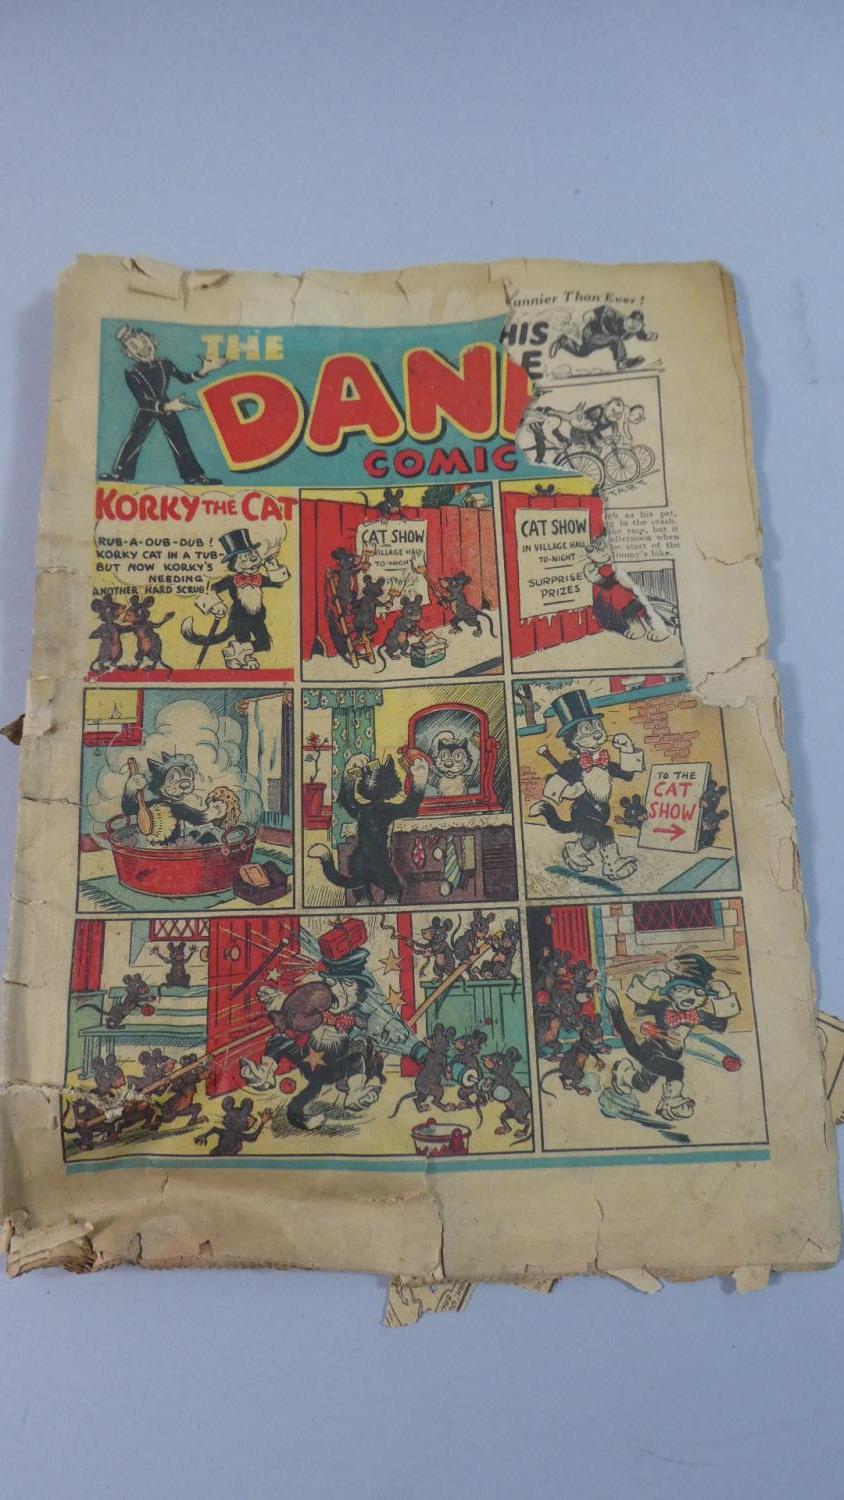 An Early Dandy Comic No.41 September 10th 1938 in Delicate Condition with Some Tears